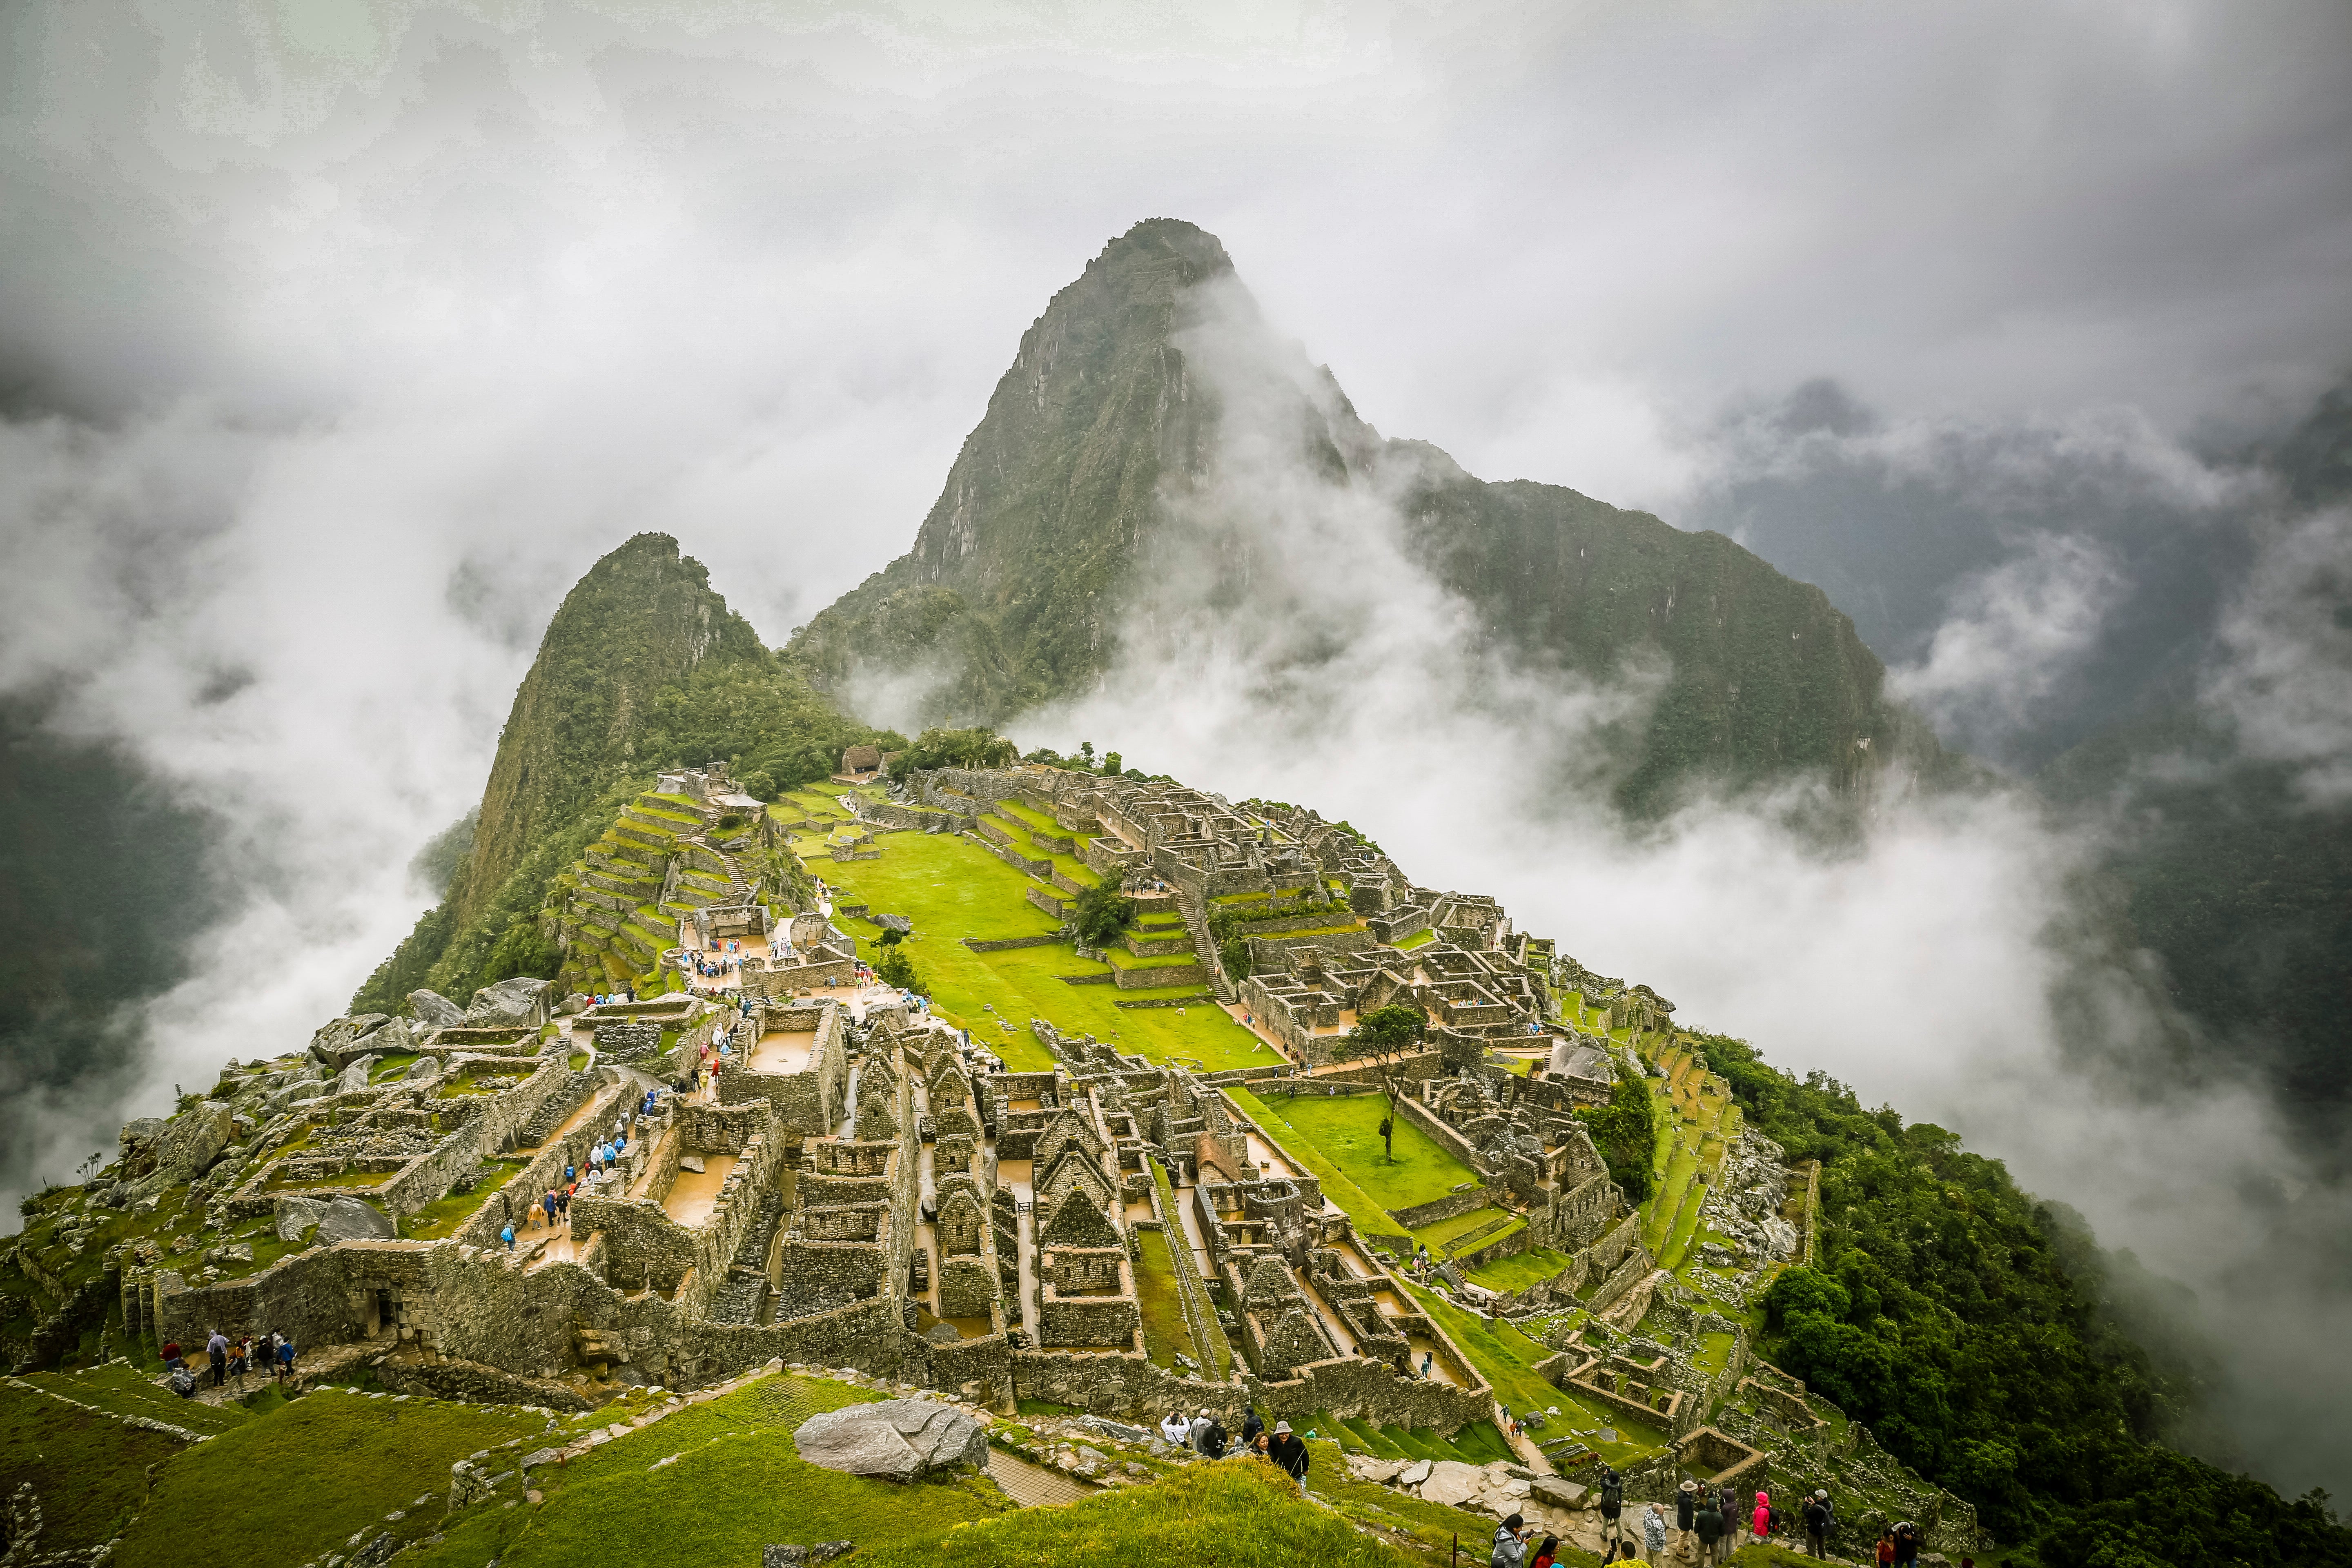 Rail links to Machu Picchu have been suspended once more